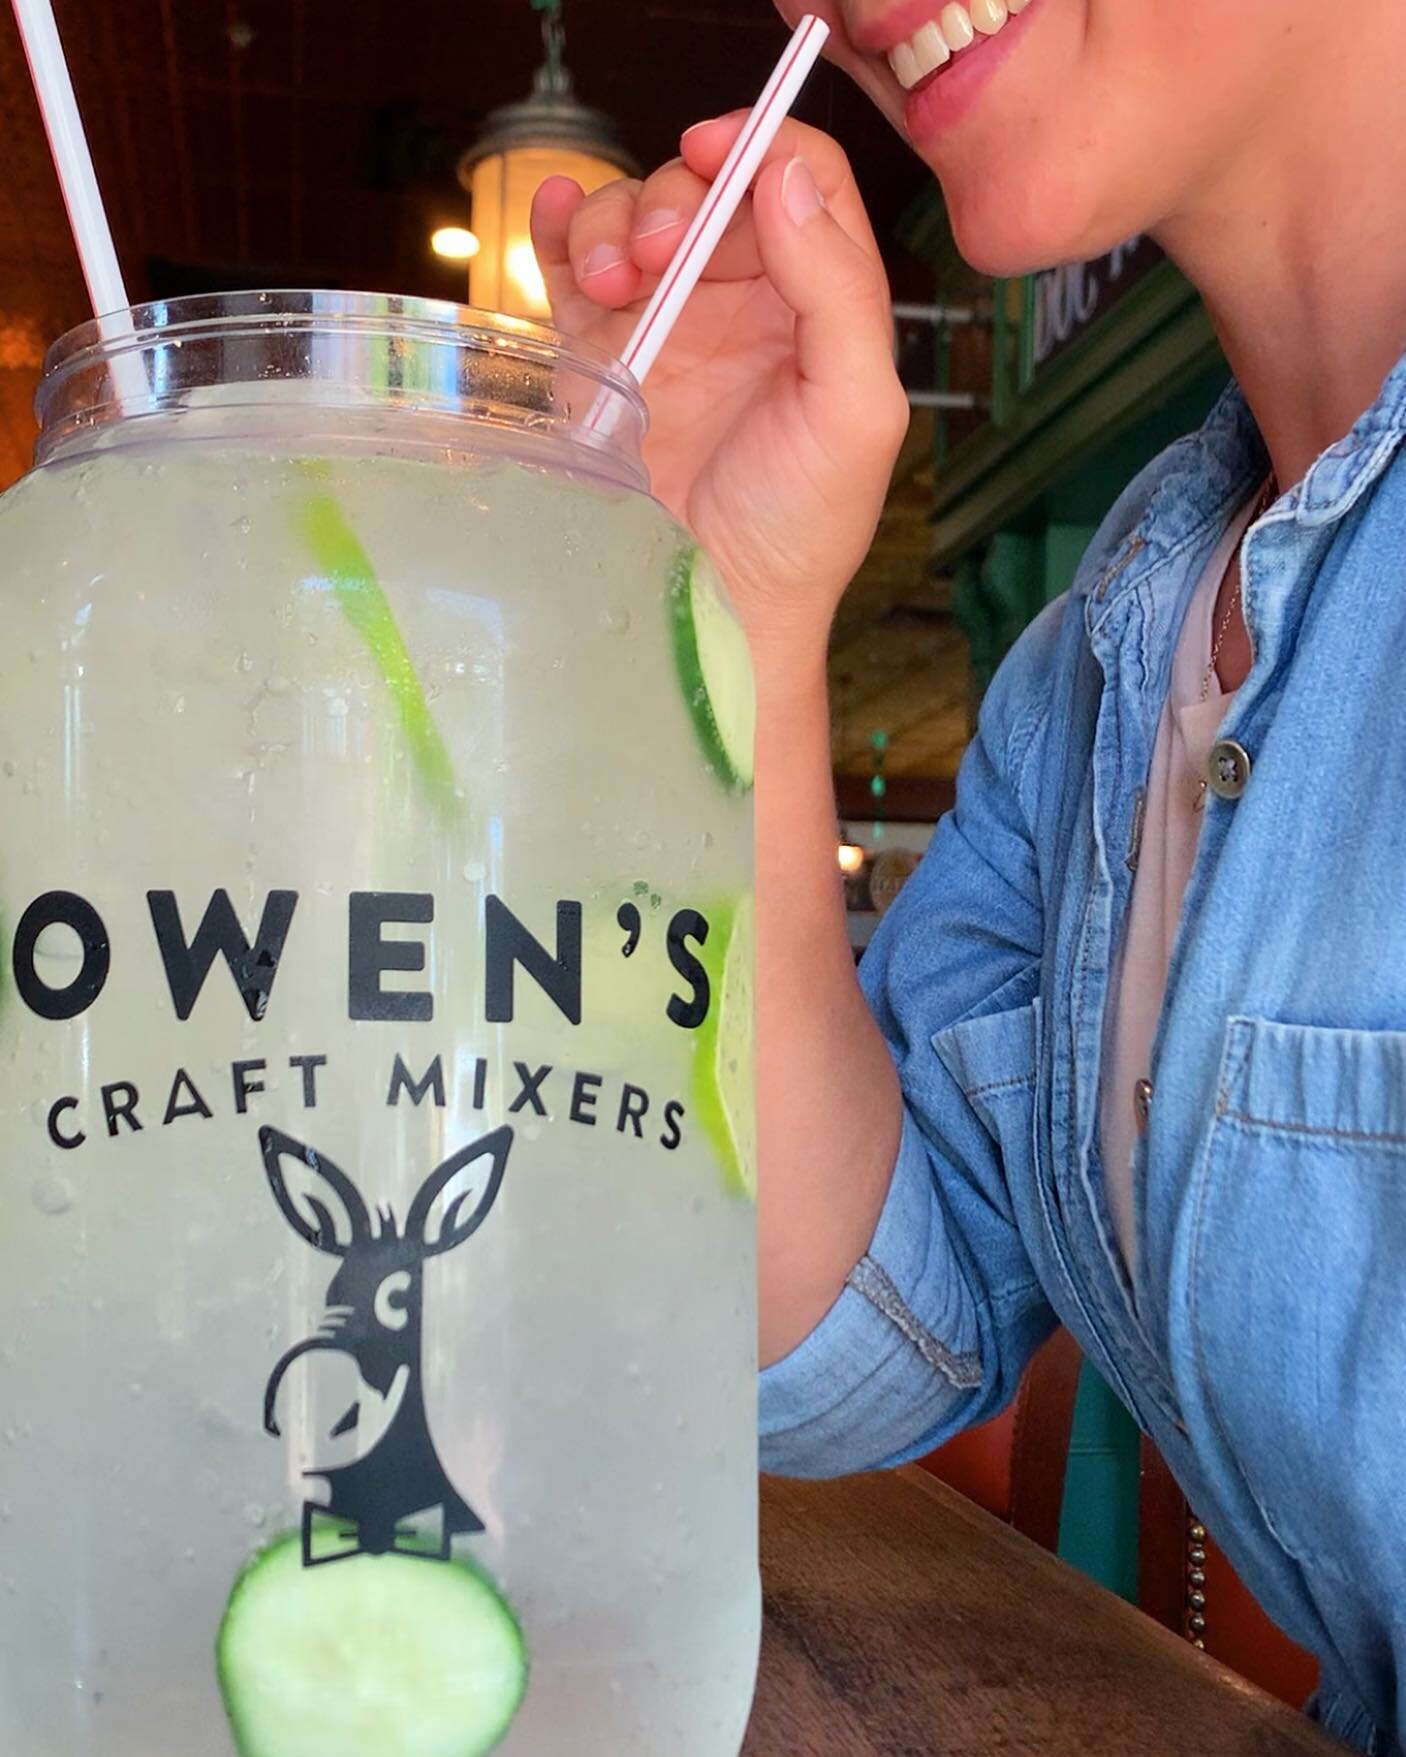 It&rsquo;s Thursday and we&rsquo;re thirsty! A Mega Mason Jar Cocktail with @owensmixers is the best cure for Thirsty Thursday! 😋

#thursday #thursdayvibes #thirstythursday #owensmixers #cucumbermint #cocktails #masonjar #irishpub #publife #pubfood 